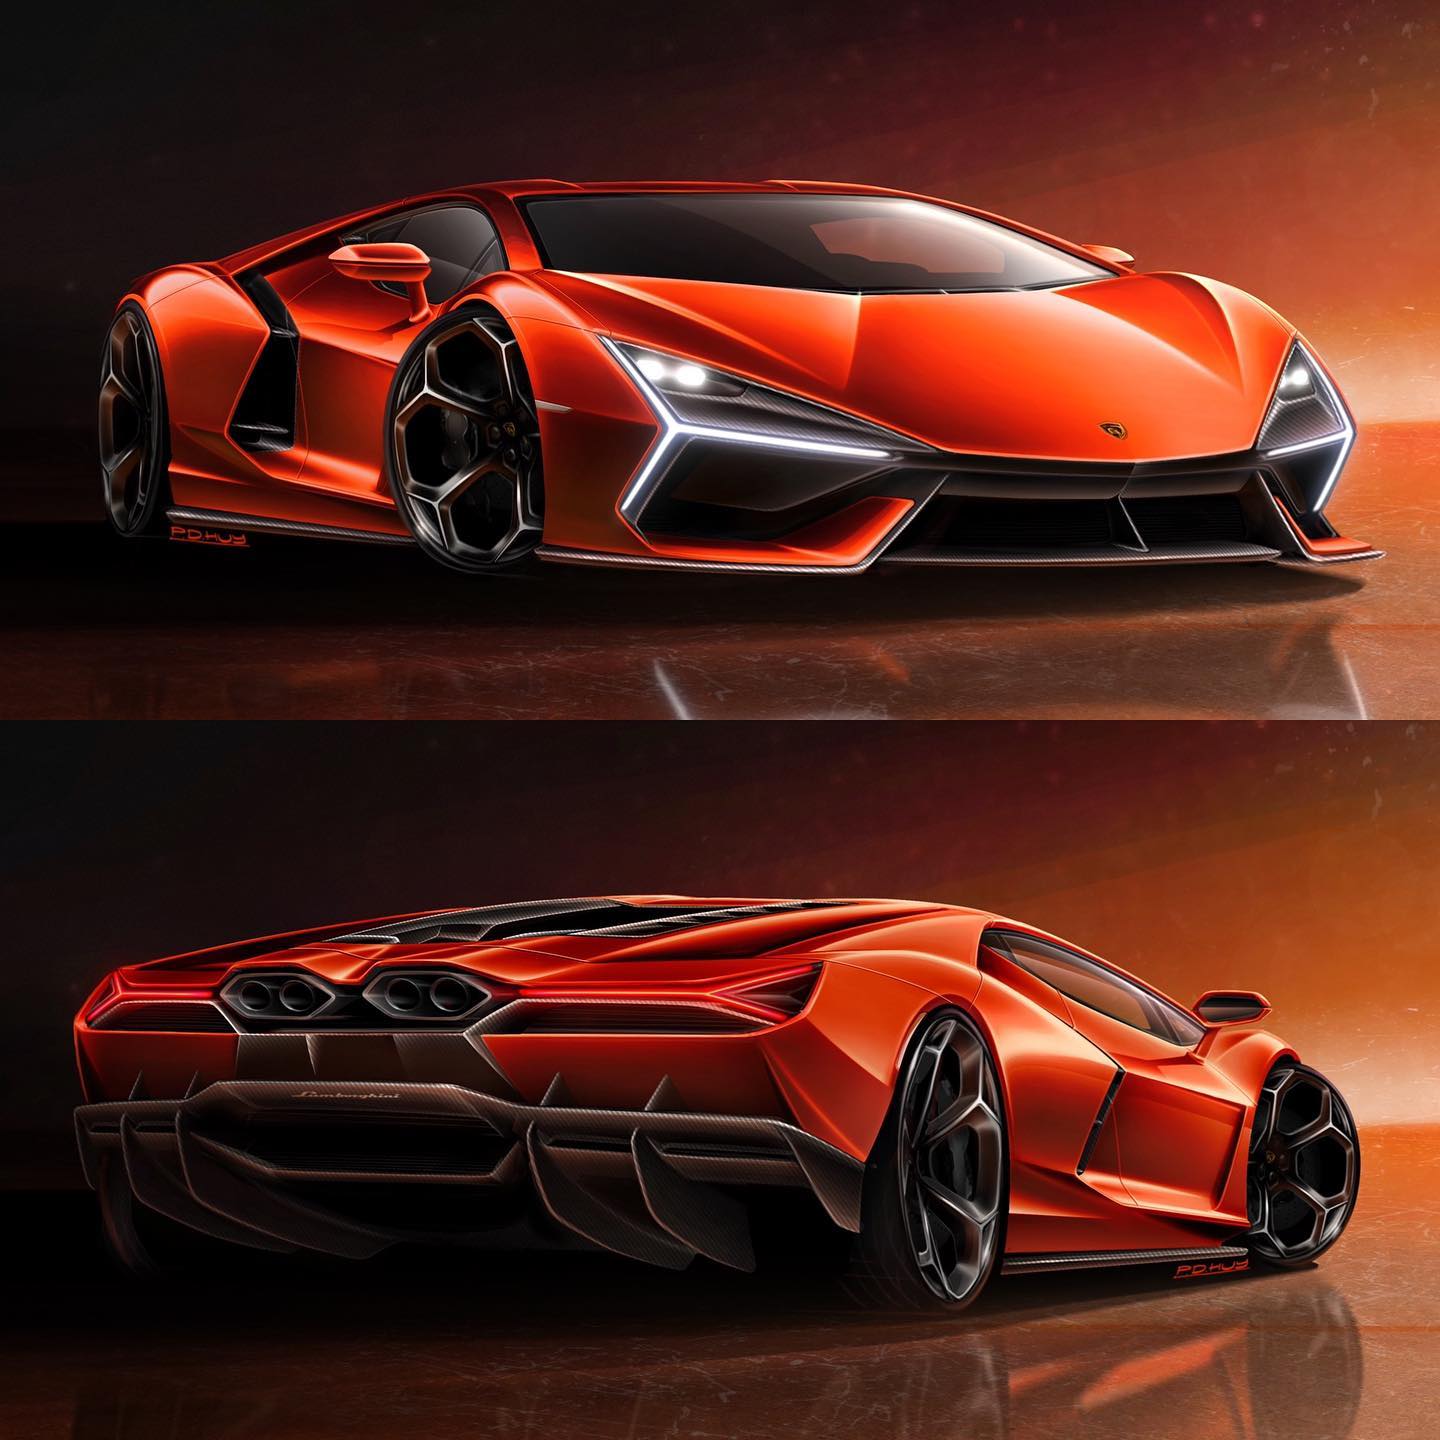 2024 Lambo Aventador Ideation Sketches Follow Leaked Drawings, Look